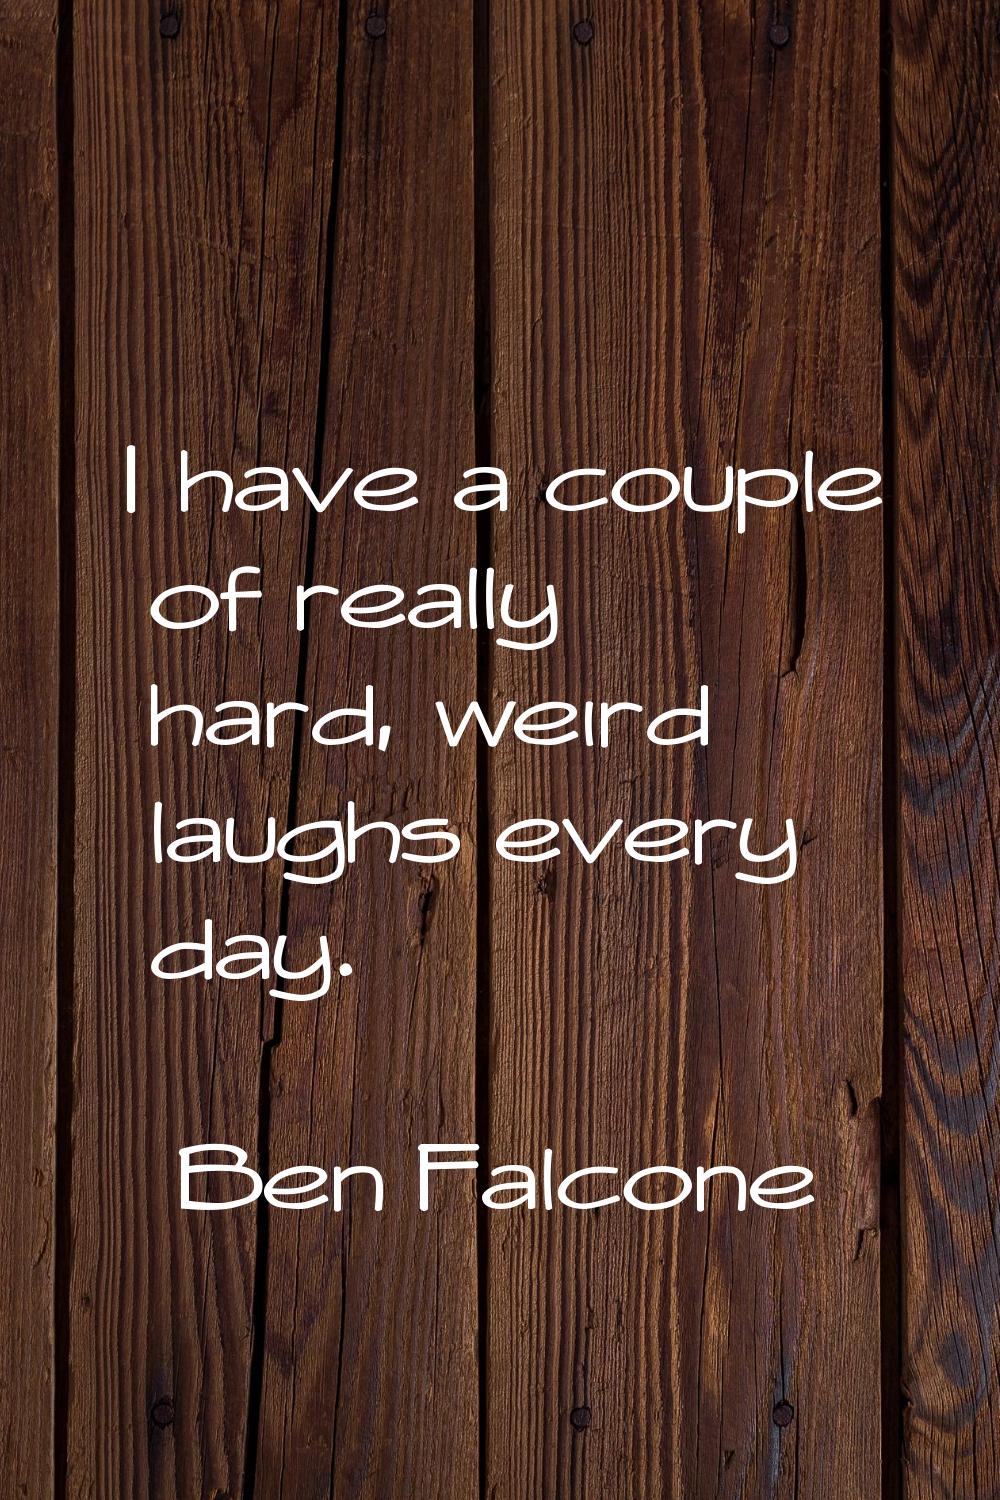 I have a couple of really hard, weird laughs every day.